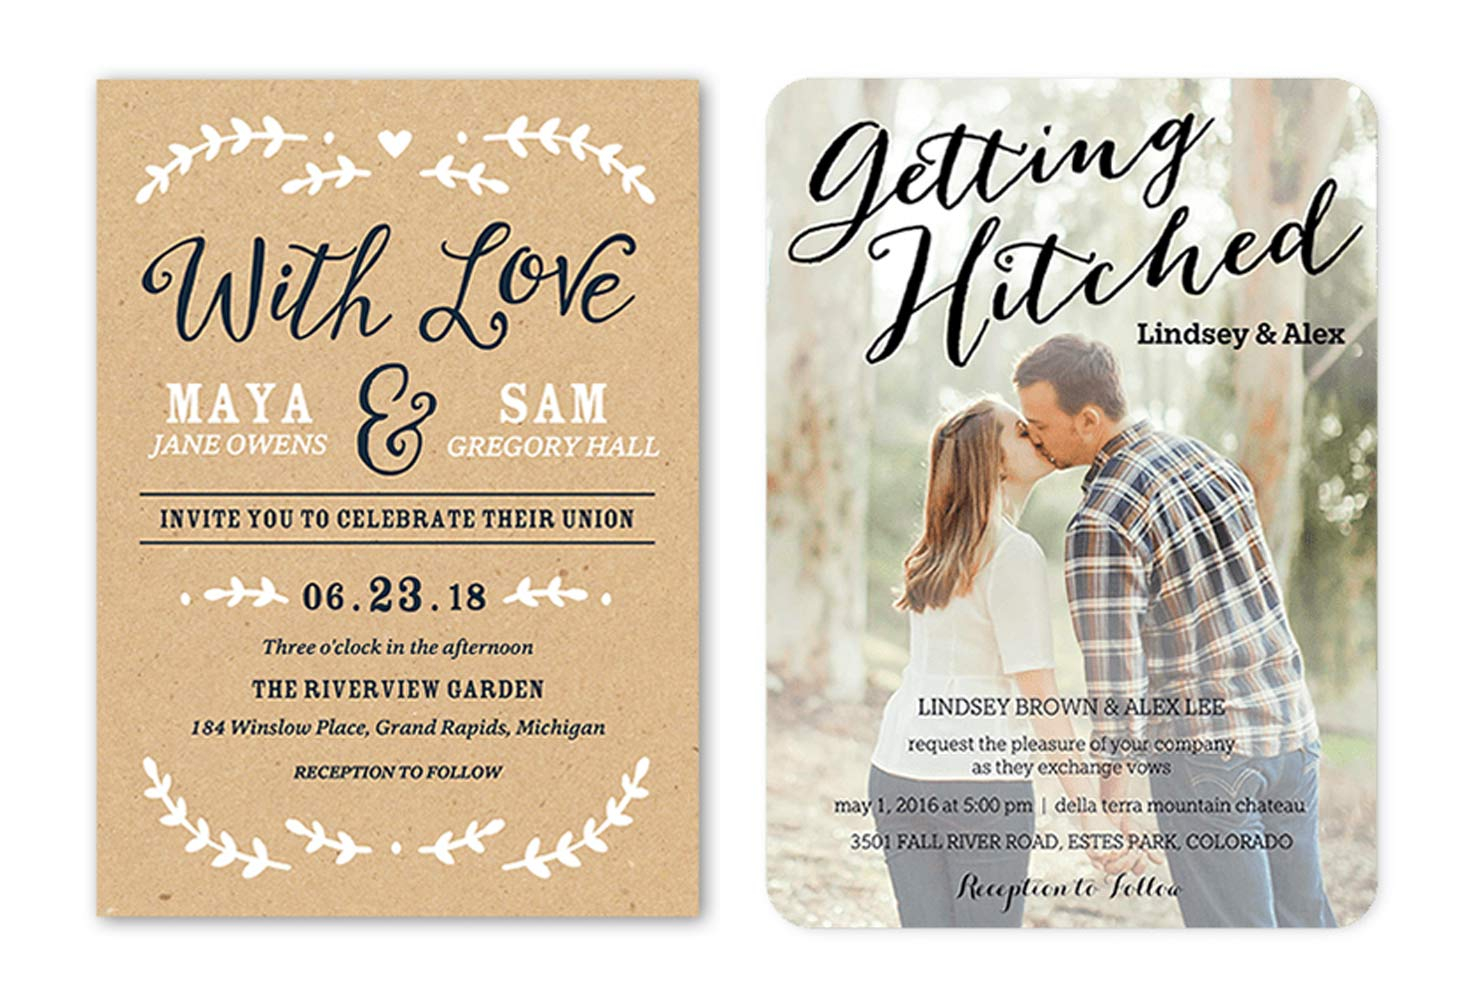 What To Write On A Wedding Invitation 35 Wedding Invitation Wording Examples 2018 Shutterfly